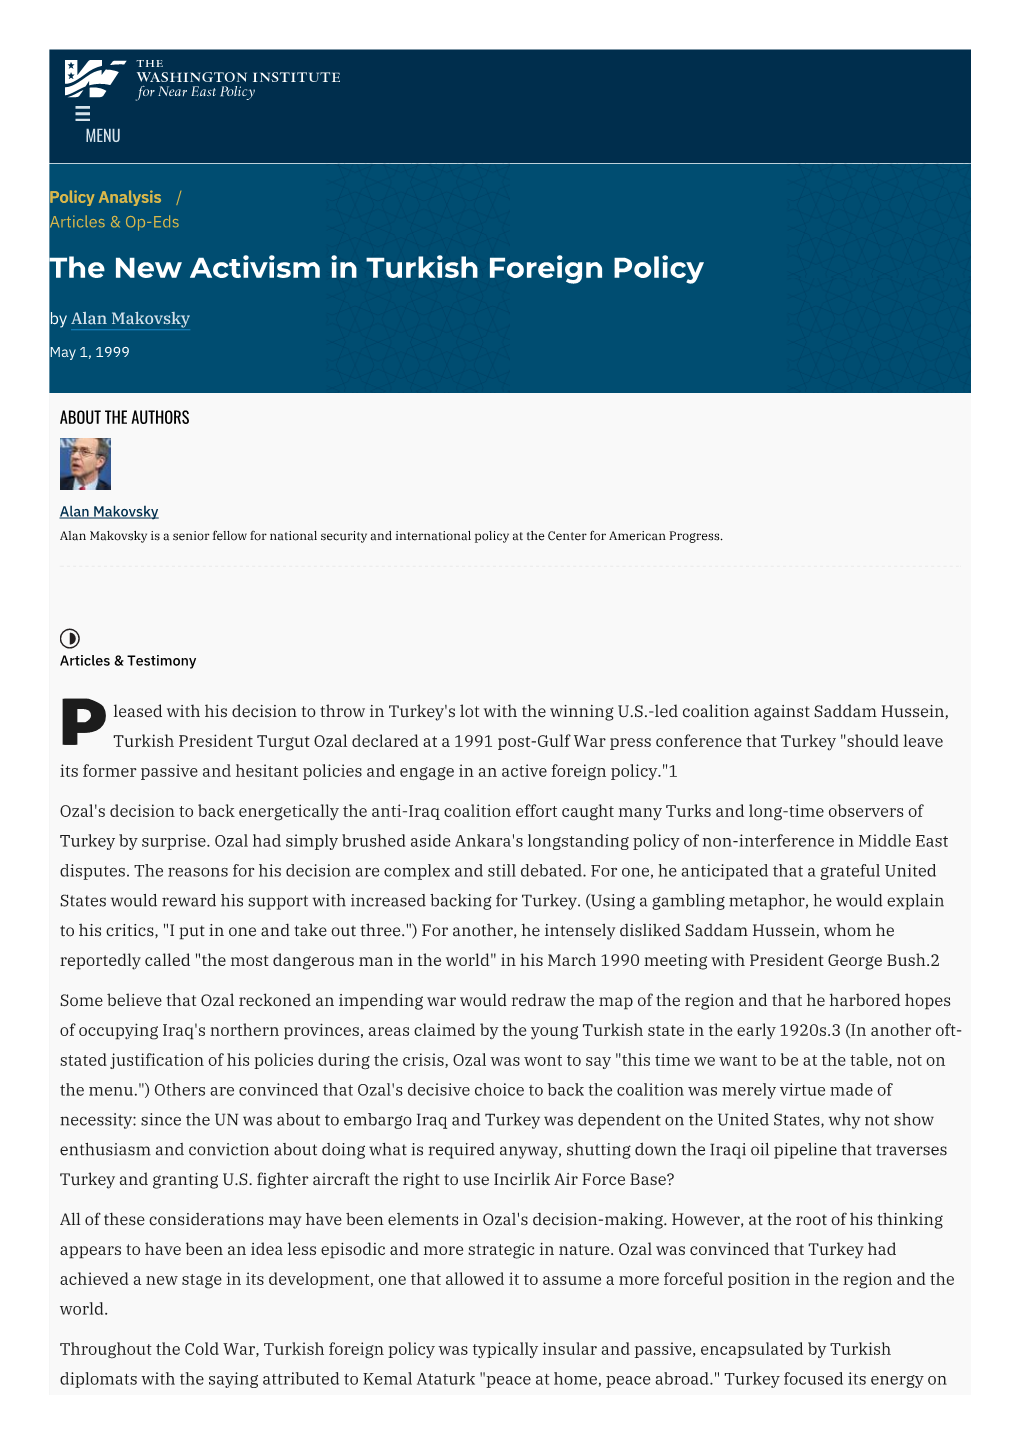 The New Activism in Turkish Foreign Policy | the Washington Institute